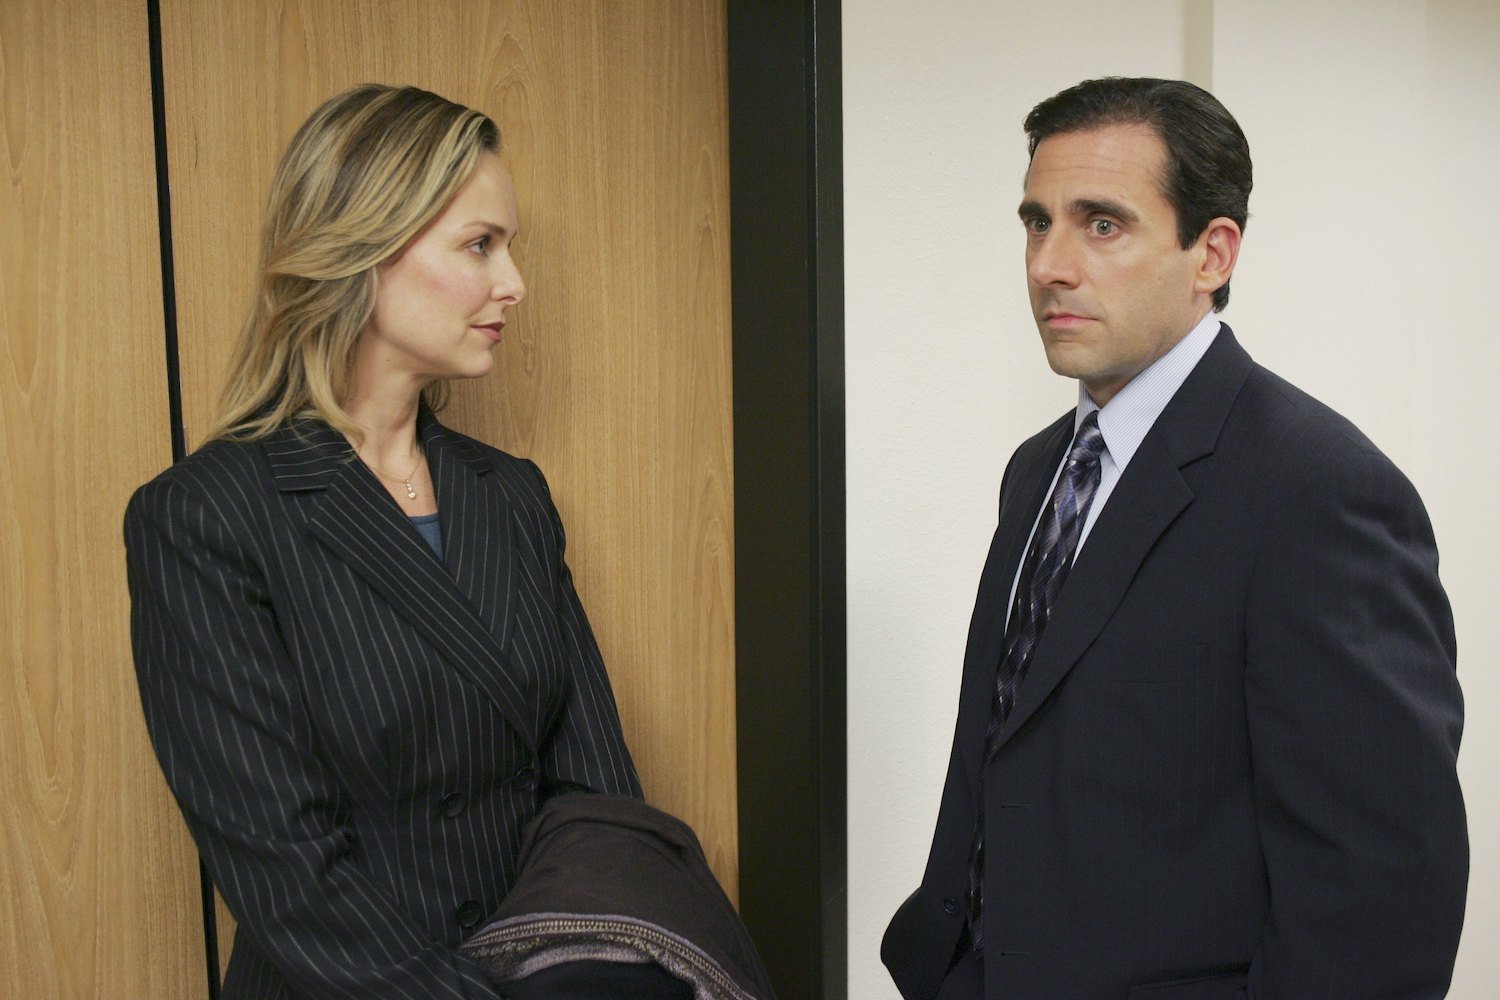 The Office: Melora Hardin as Jan Levinson and Steve Carell as Michael Scott